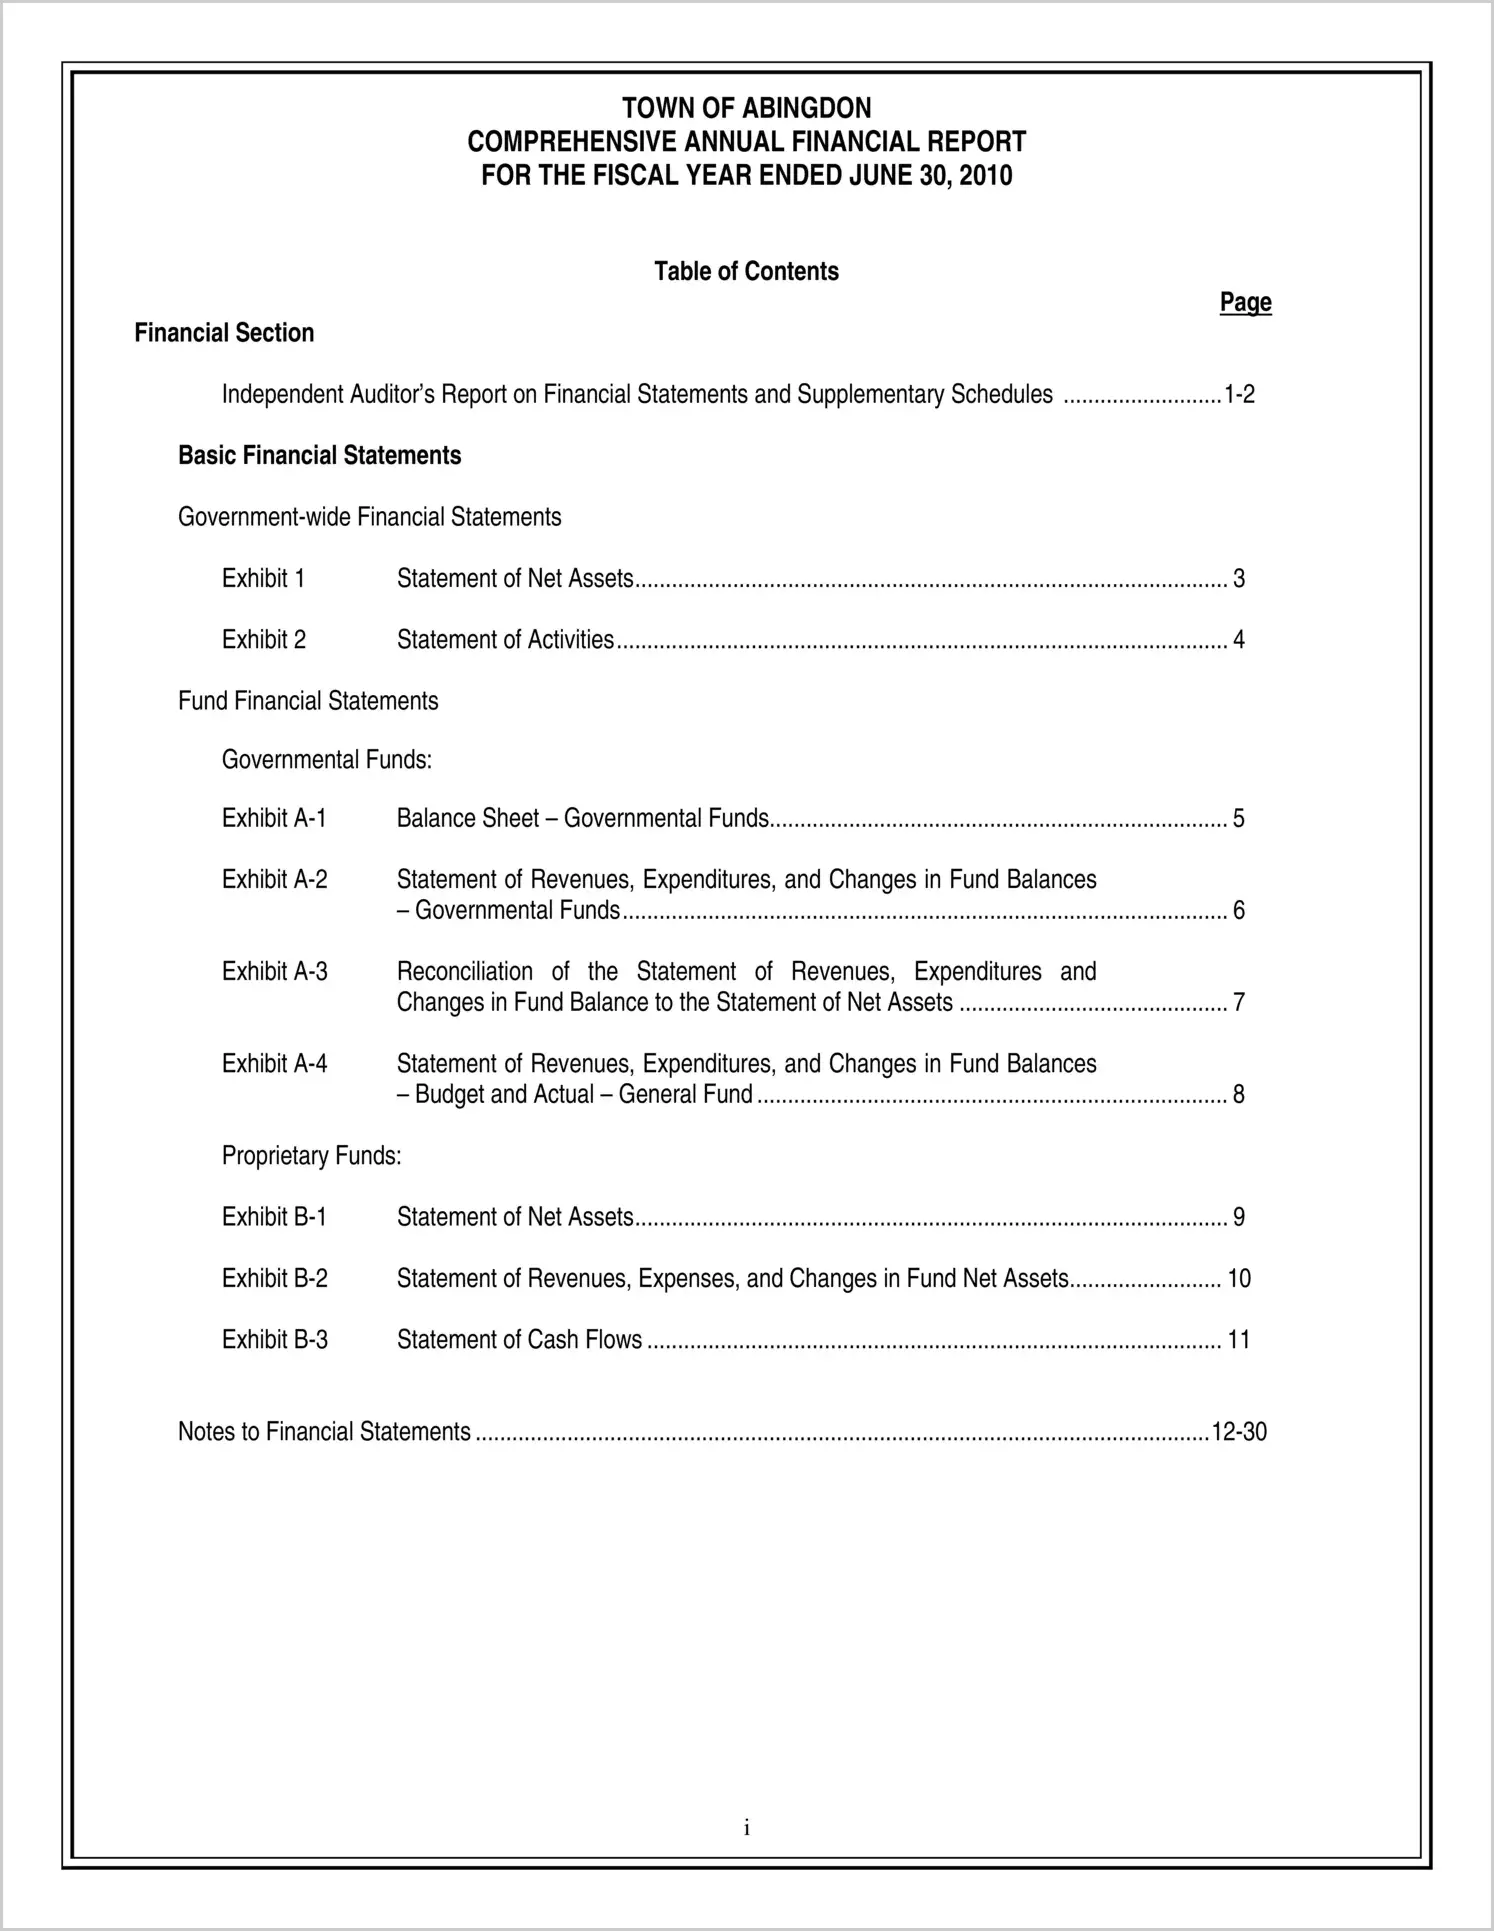 2010 Annual Financial Report for Town of Abingdon